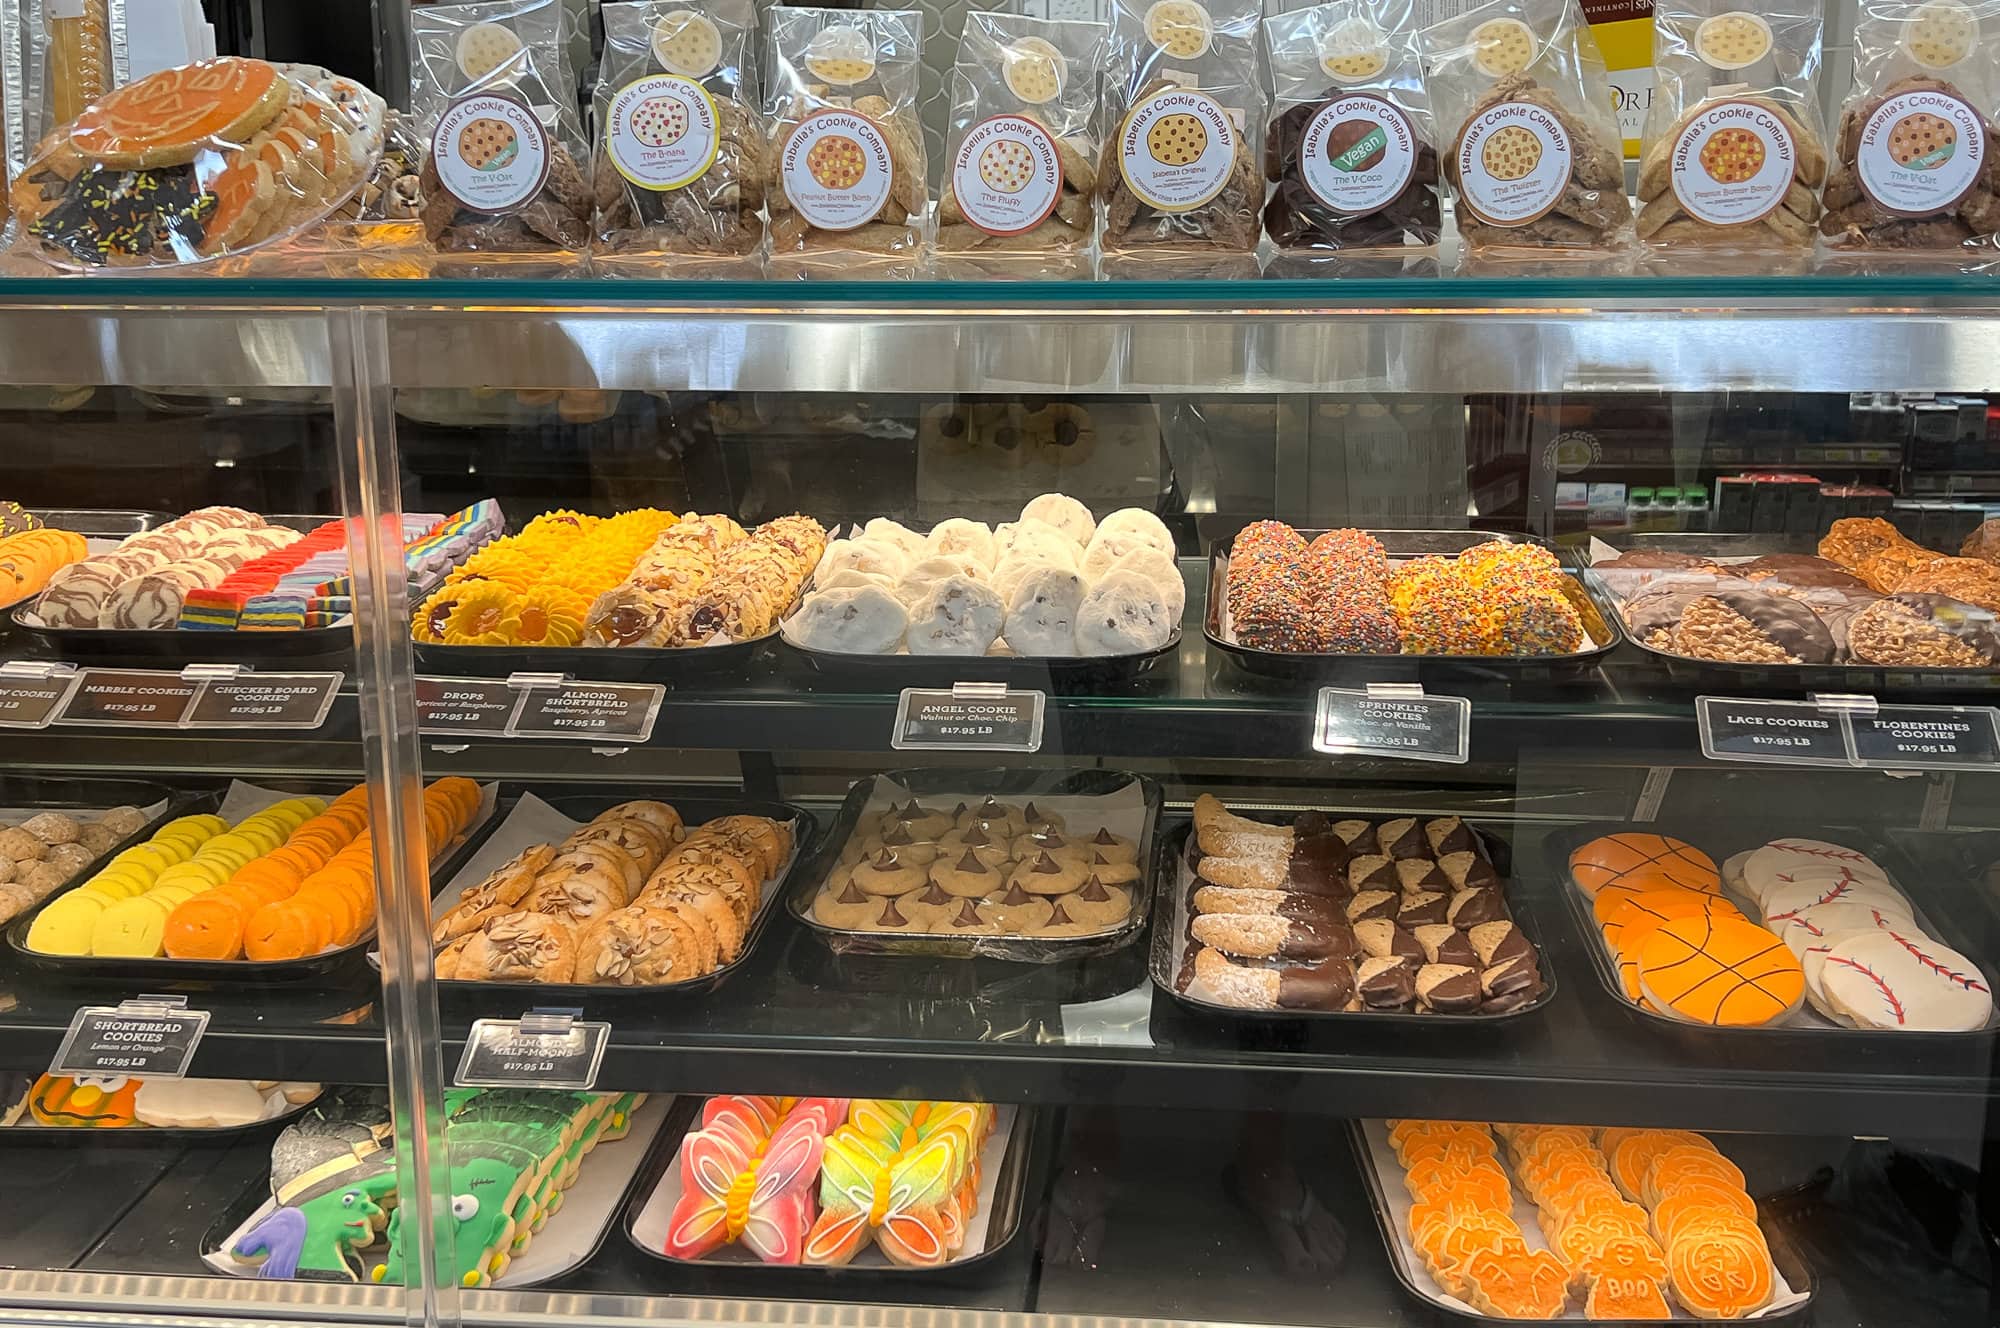 Pastry and cookies display case.